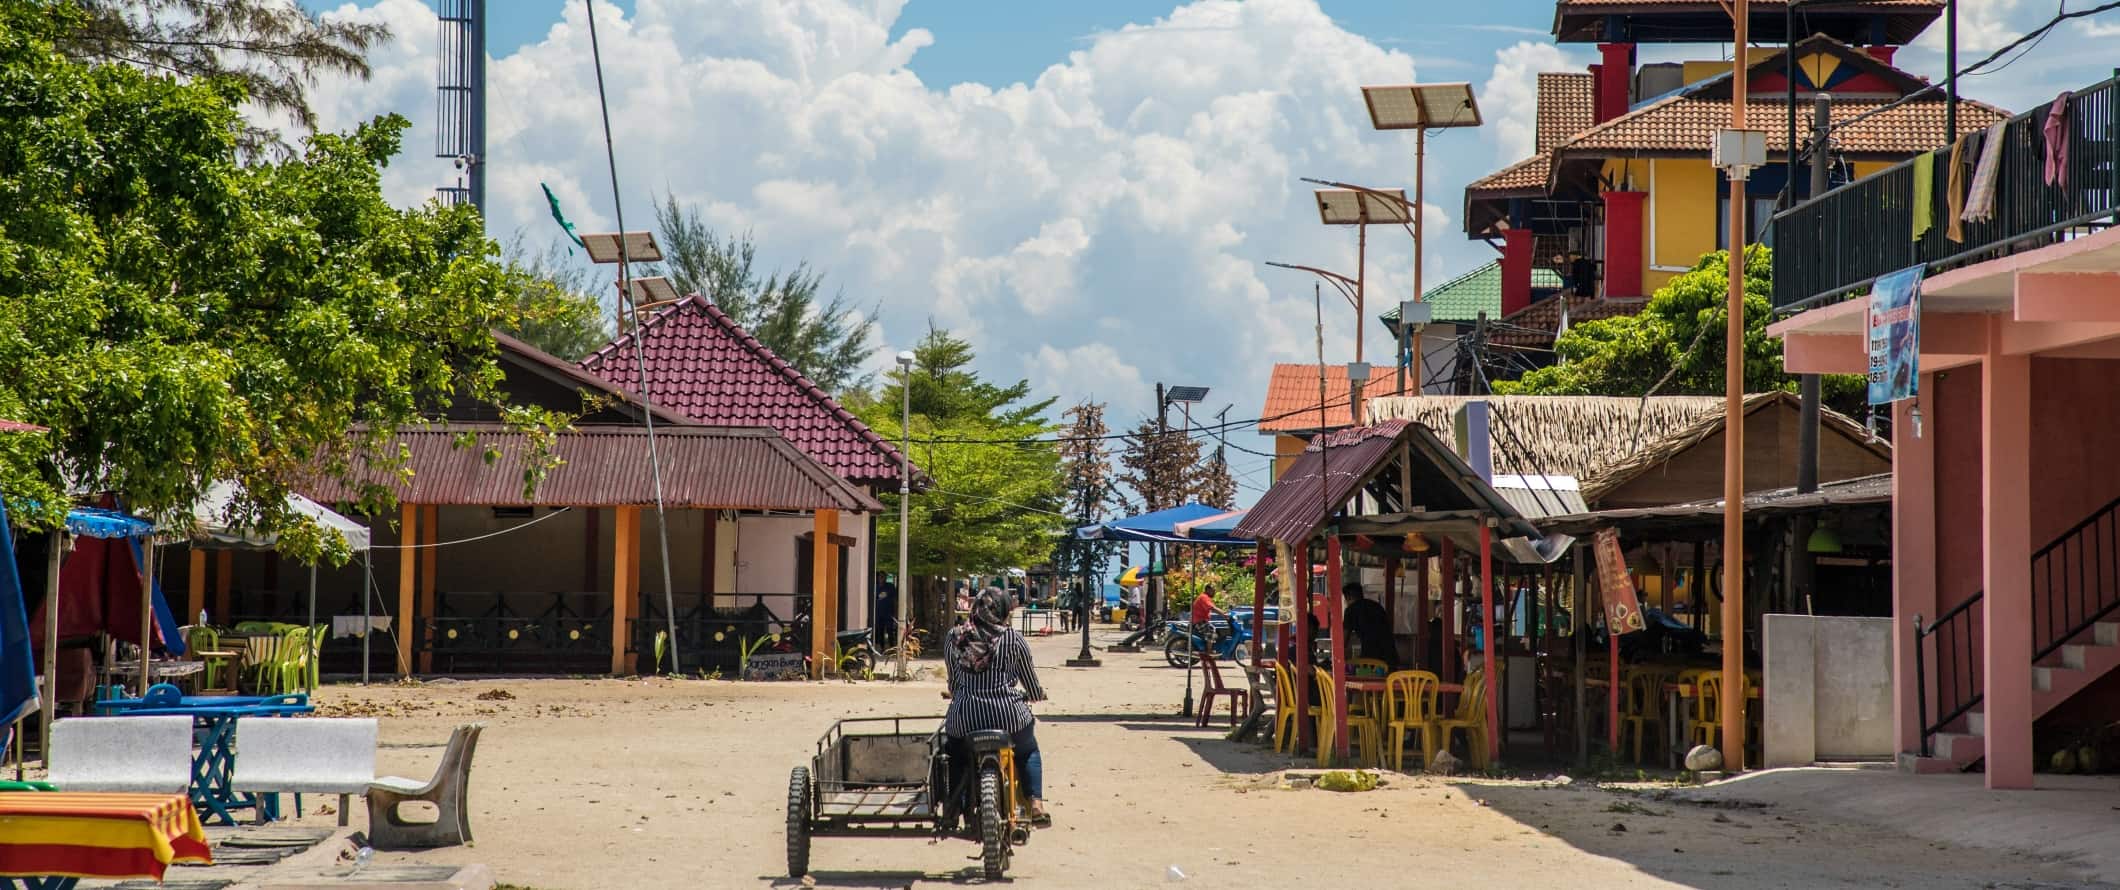 A person riding a motorbike down a sandy street with low buildings on both sides in the Perhentian Islands, Malaysia